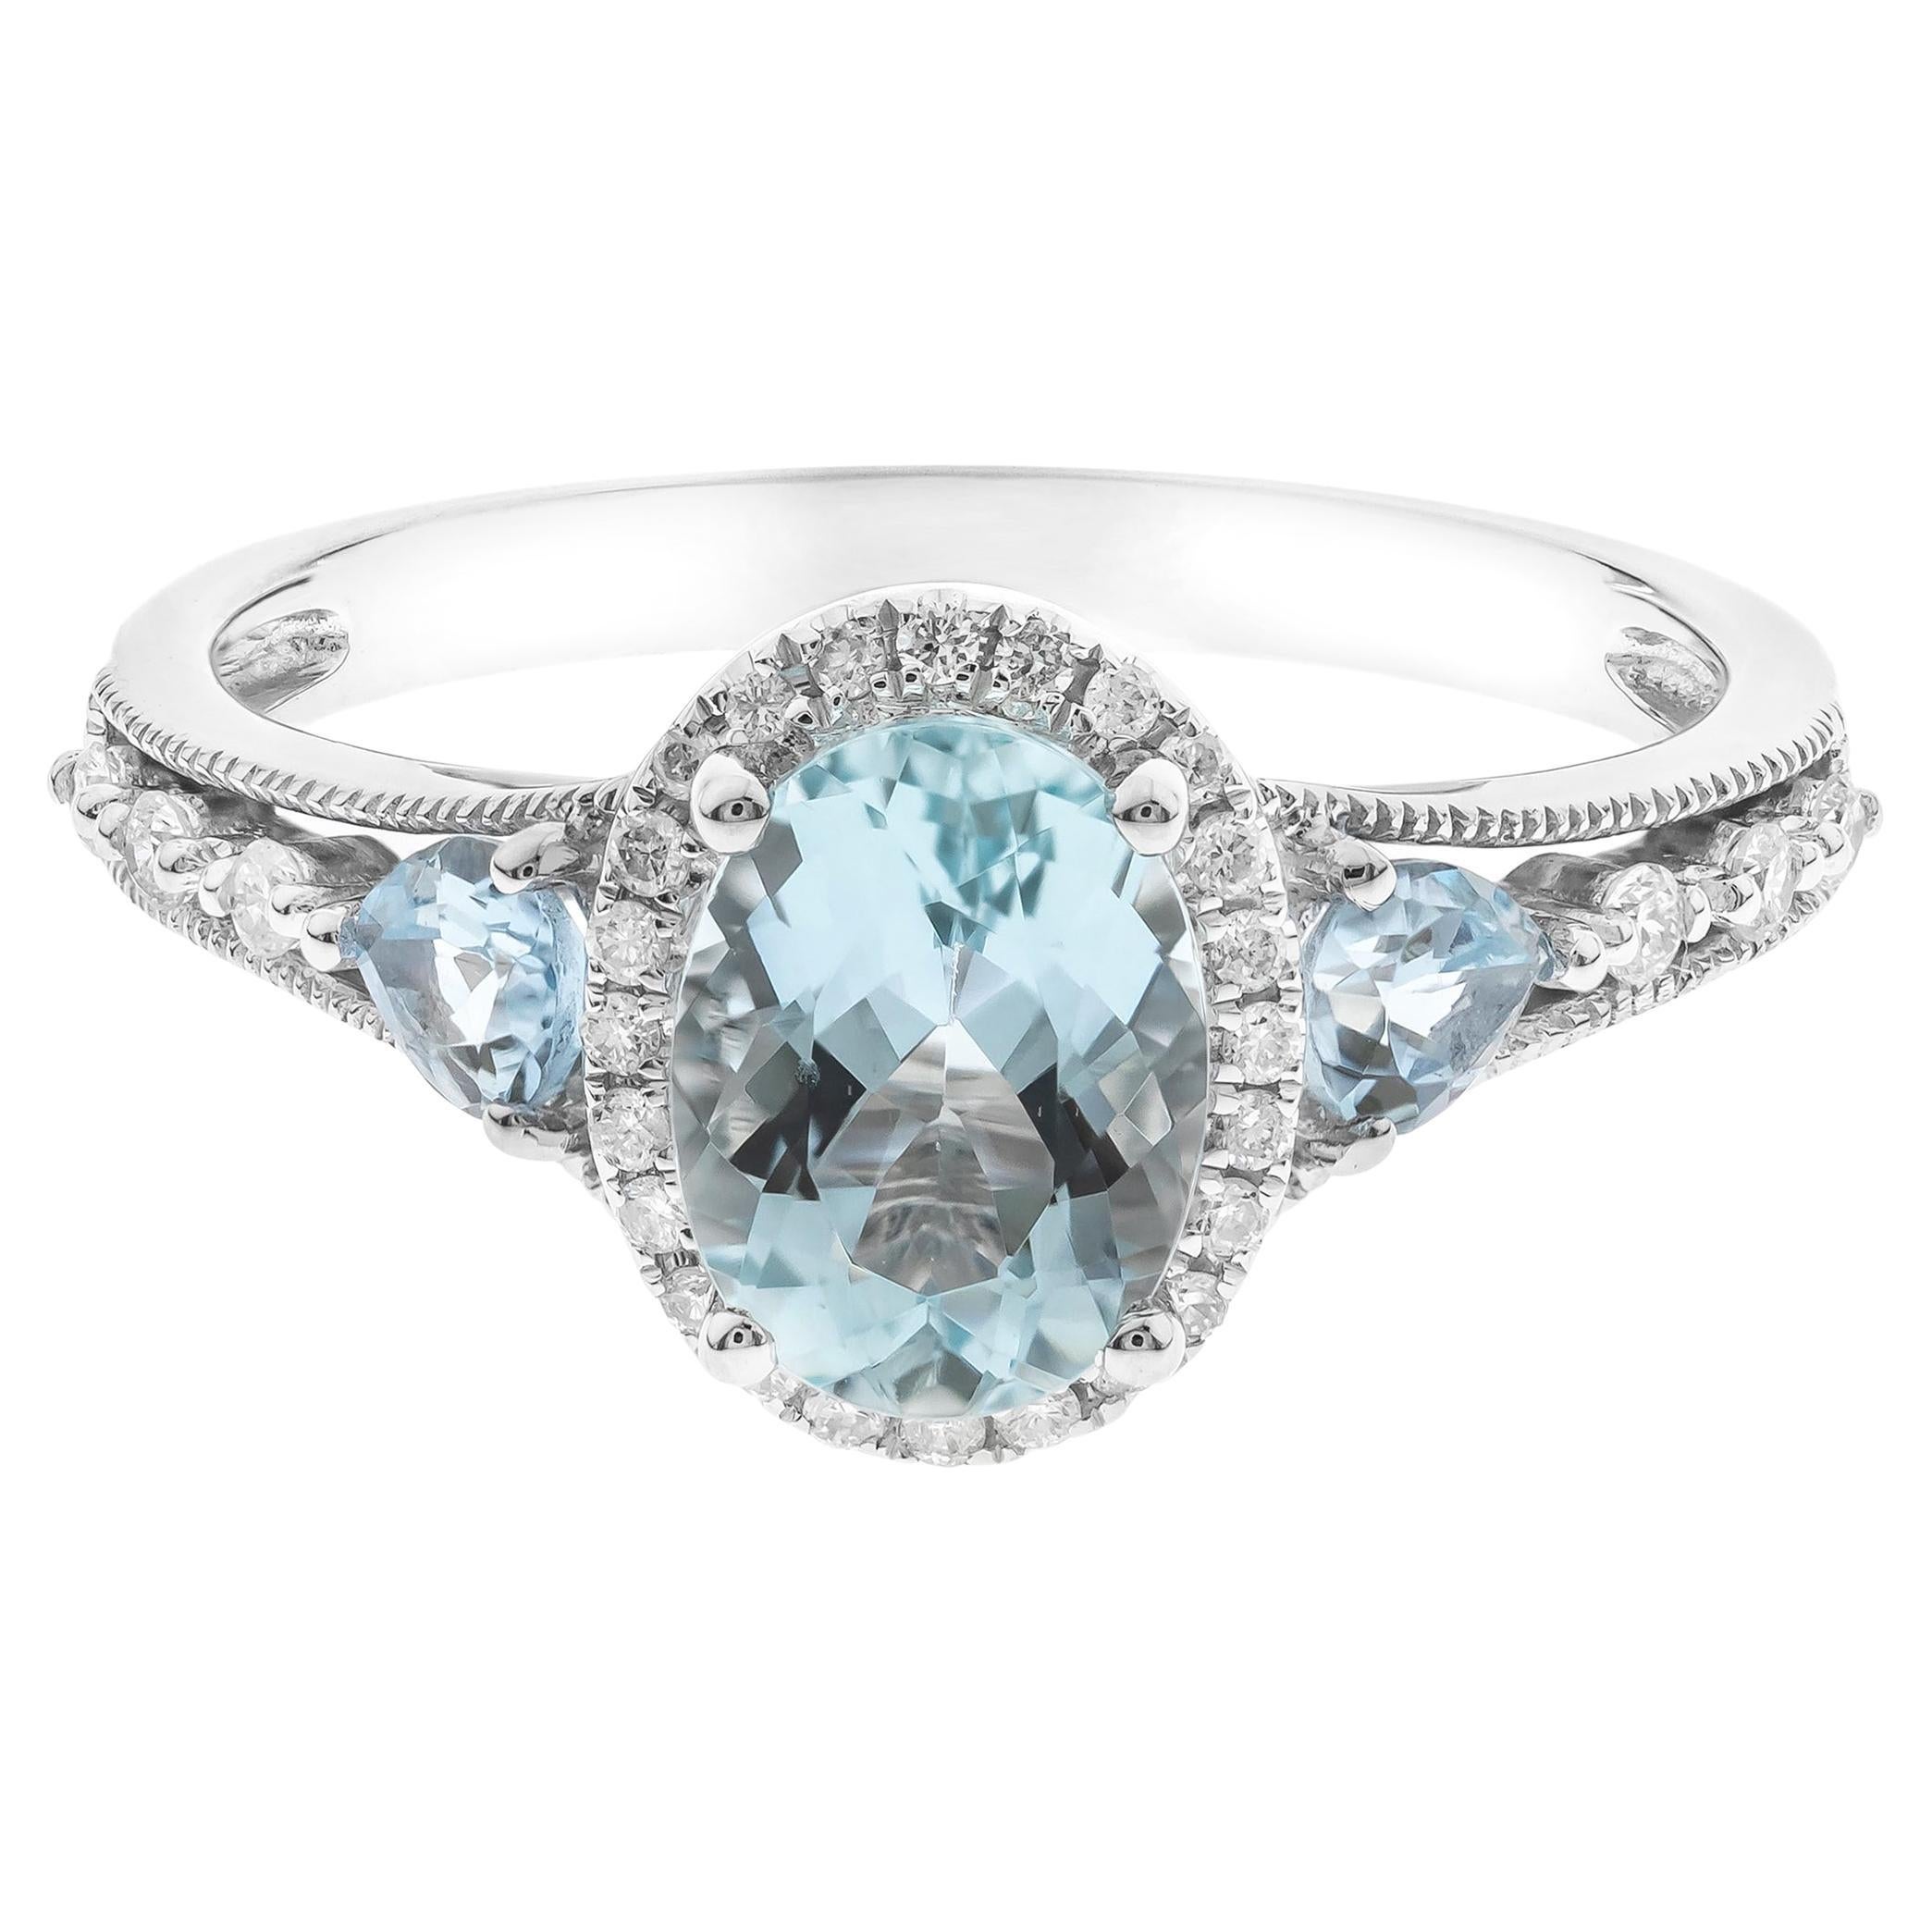 1.10 Carat Oval-Cut Aquamarine with Diamond Accents 14K White Gold Ring